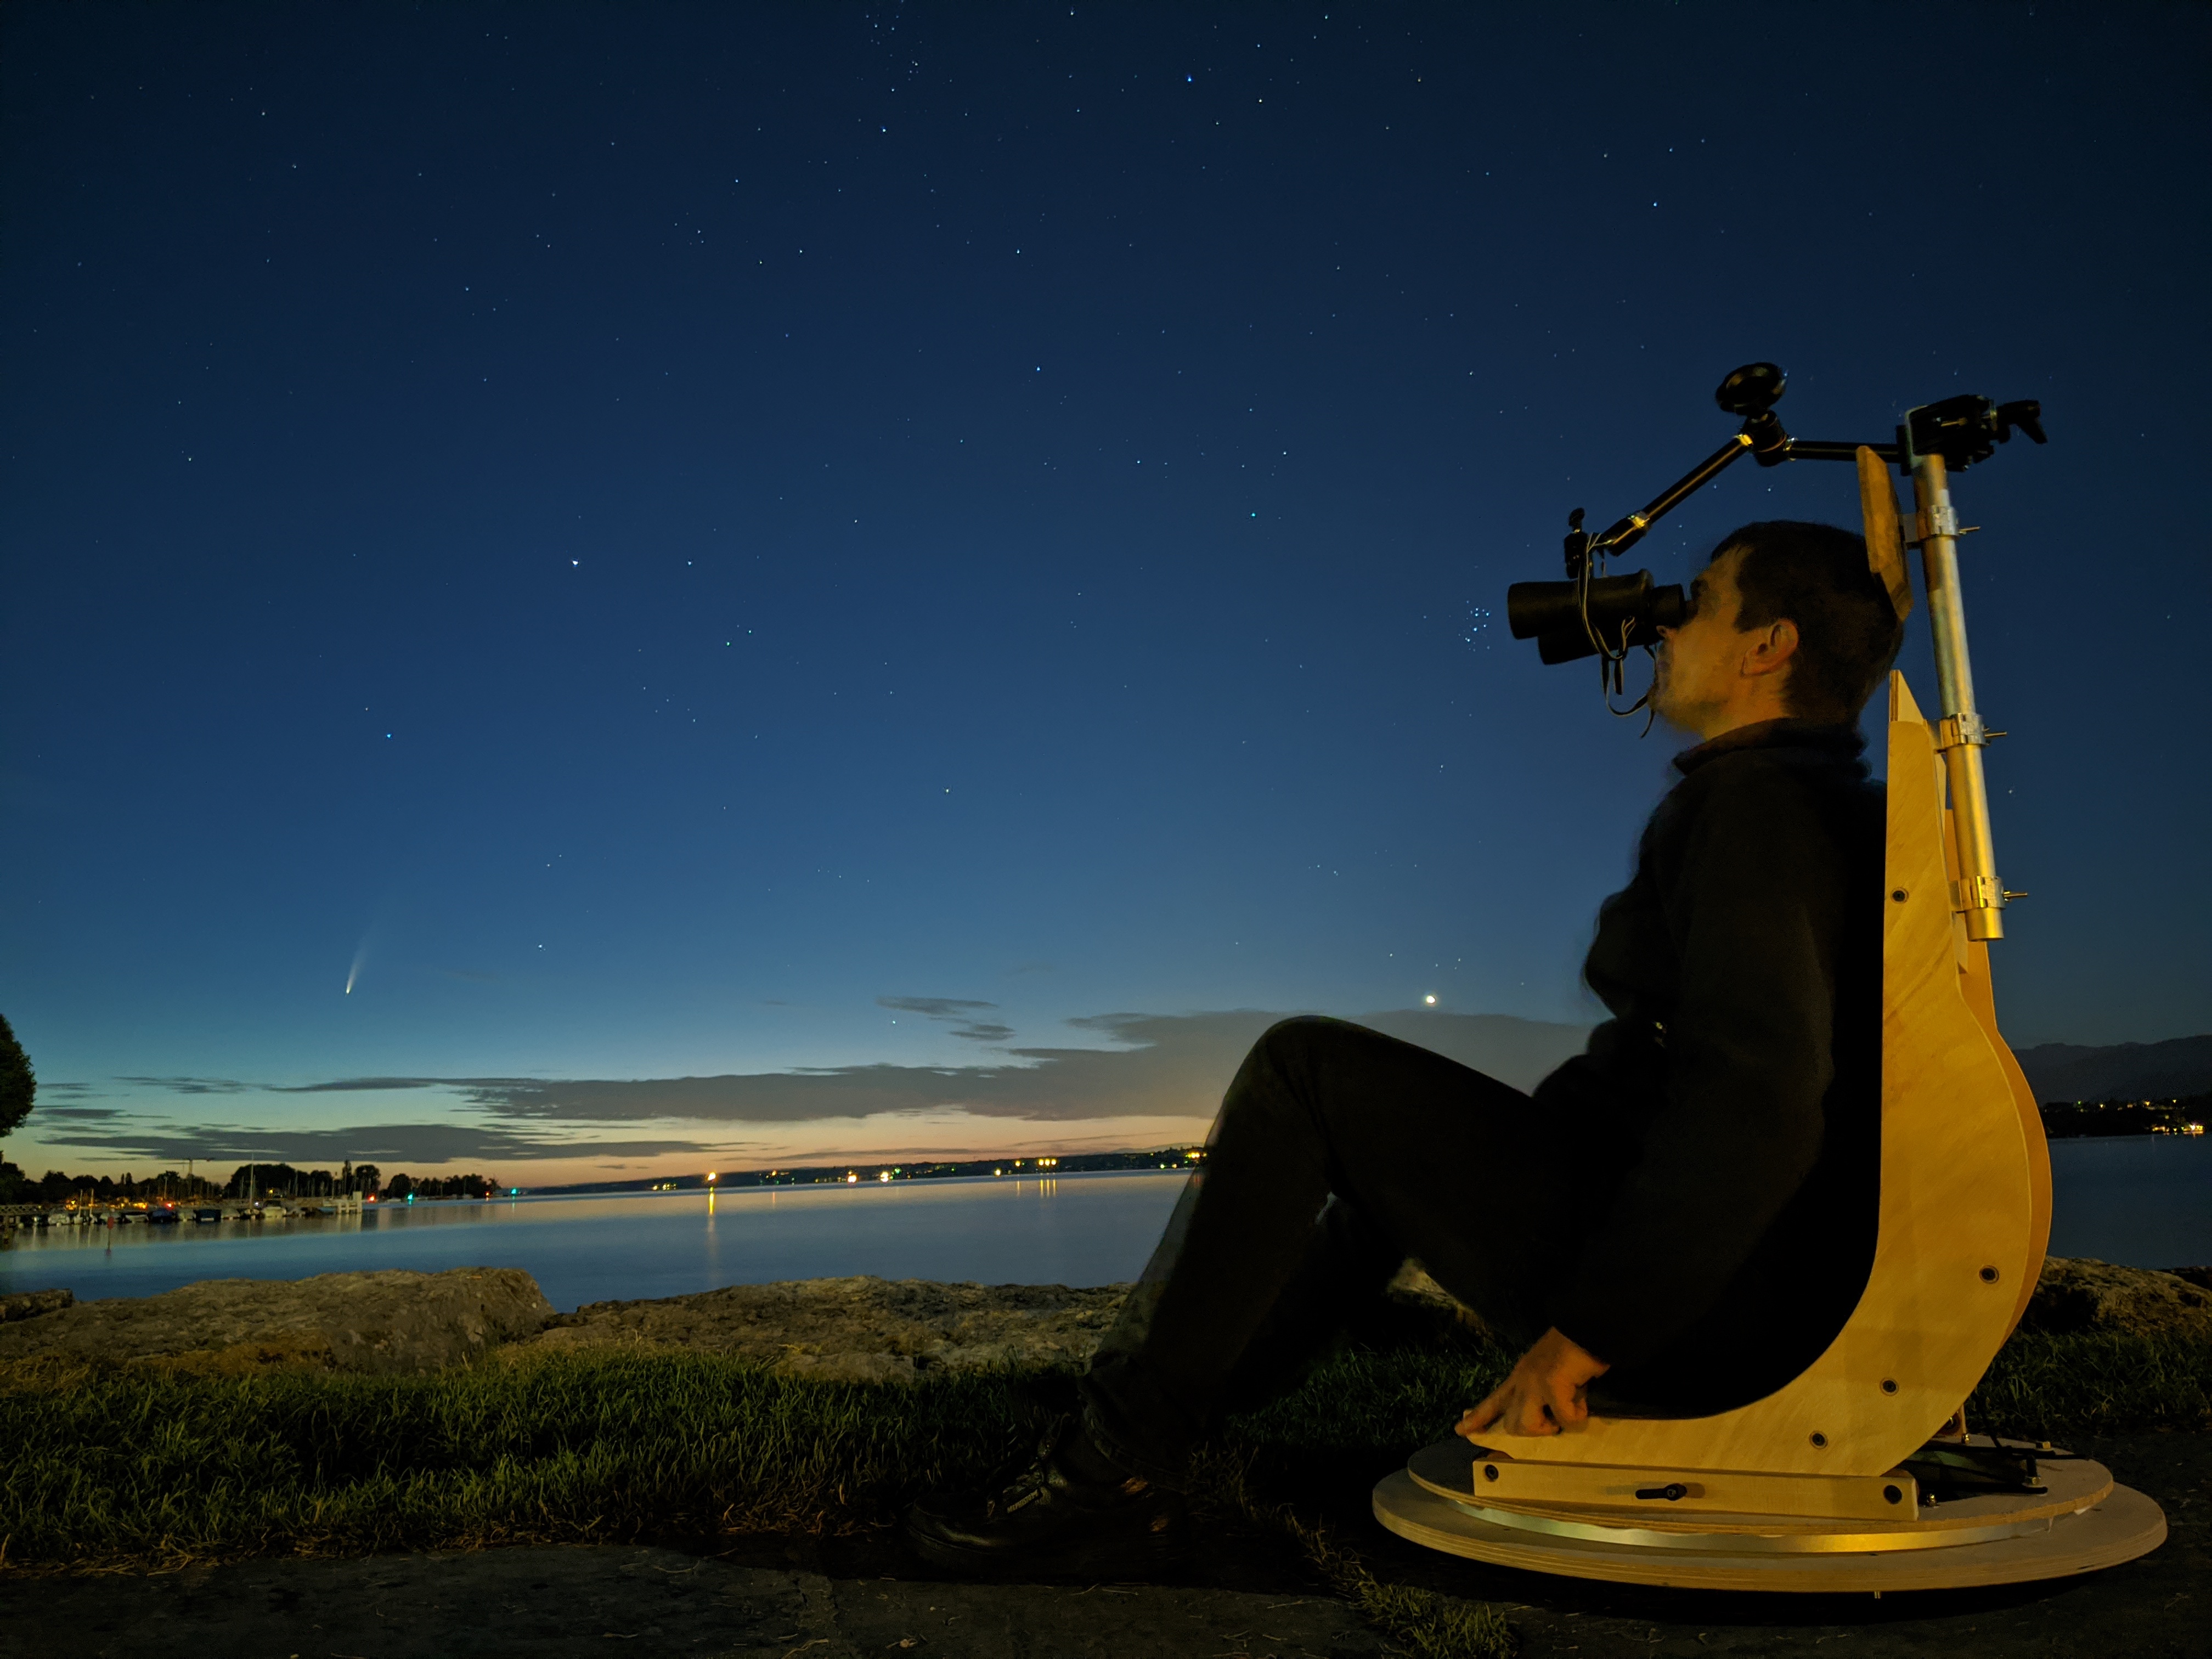 Neowise chair to scan the skies with binoculars - prototype